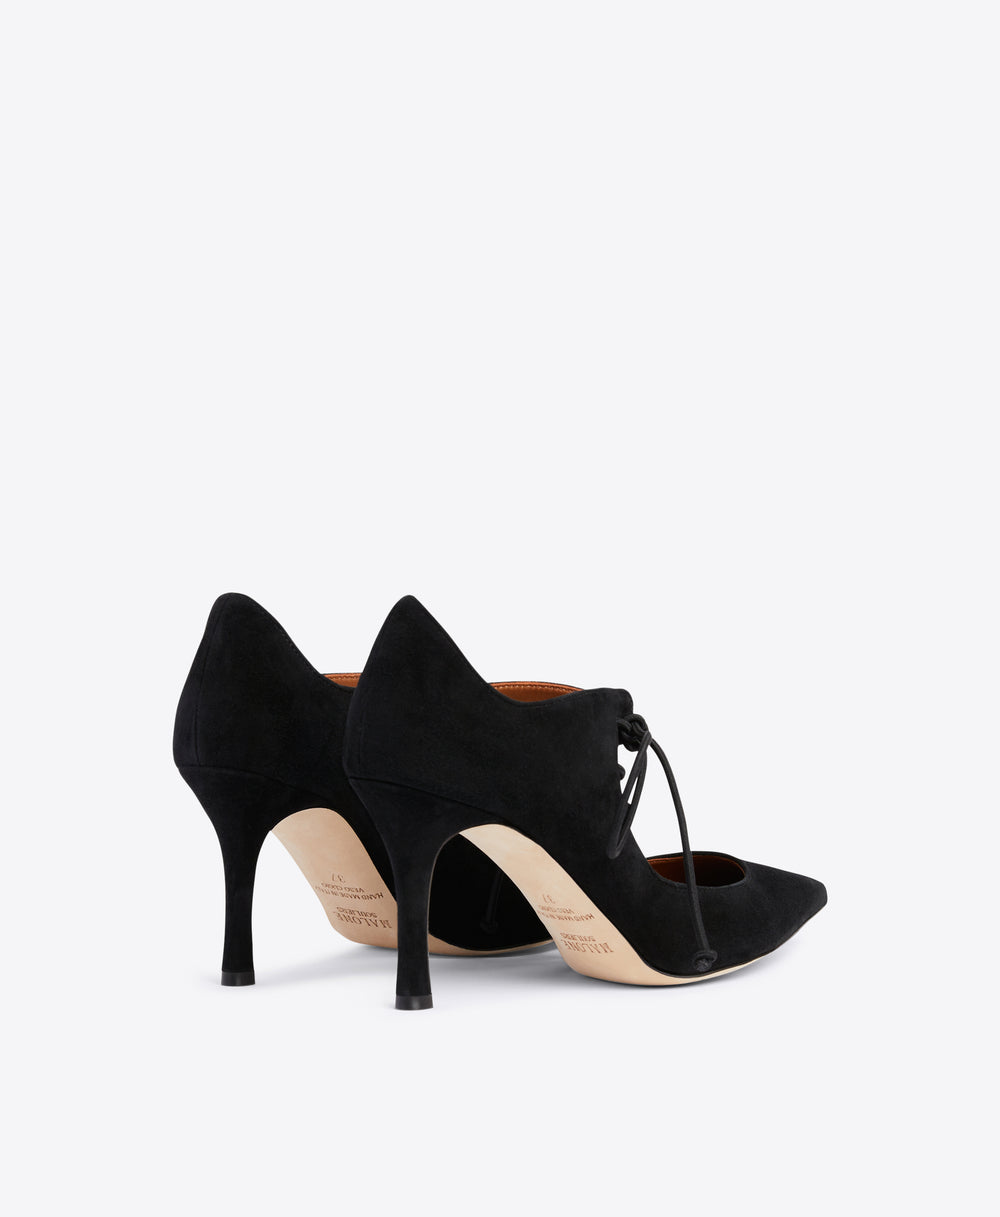 Black Suede Lace-up Pump - Pointed Toe on Flared Stiletto | Malone Souliers